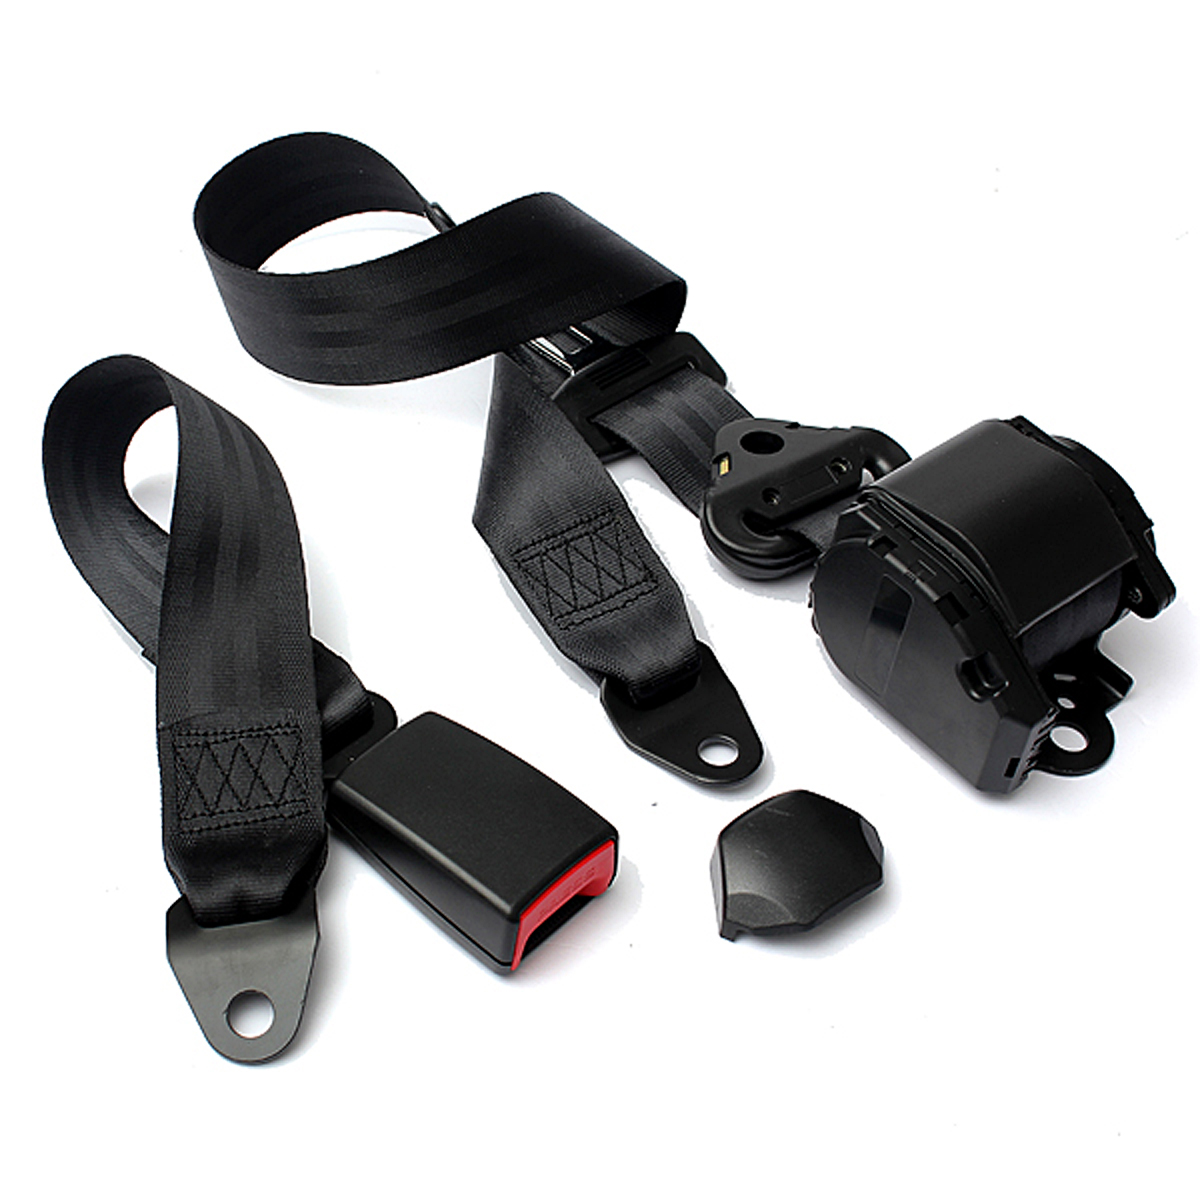 1 Set Gray Car Auto Vehicle Adjustable Retractable 3Point Safety Seat Belt Strap 